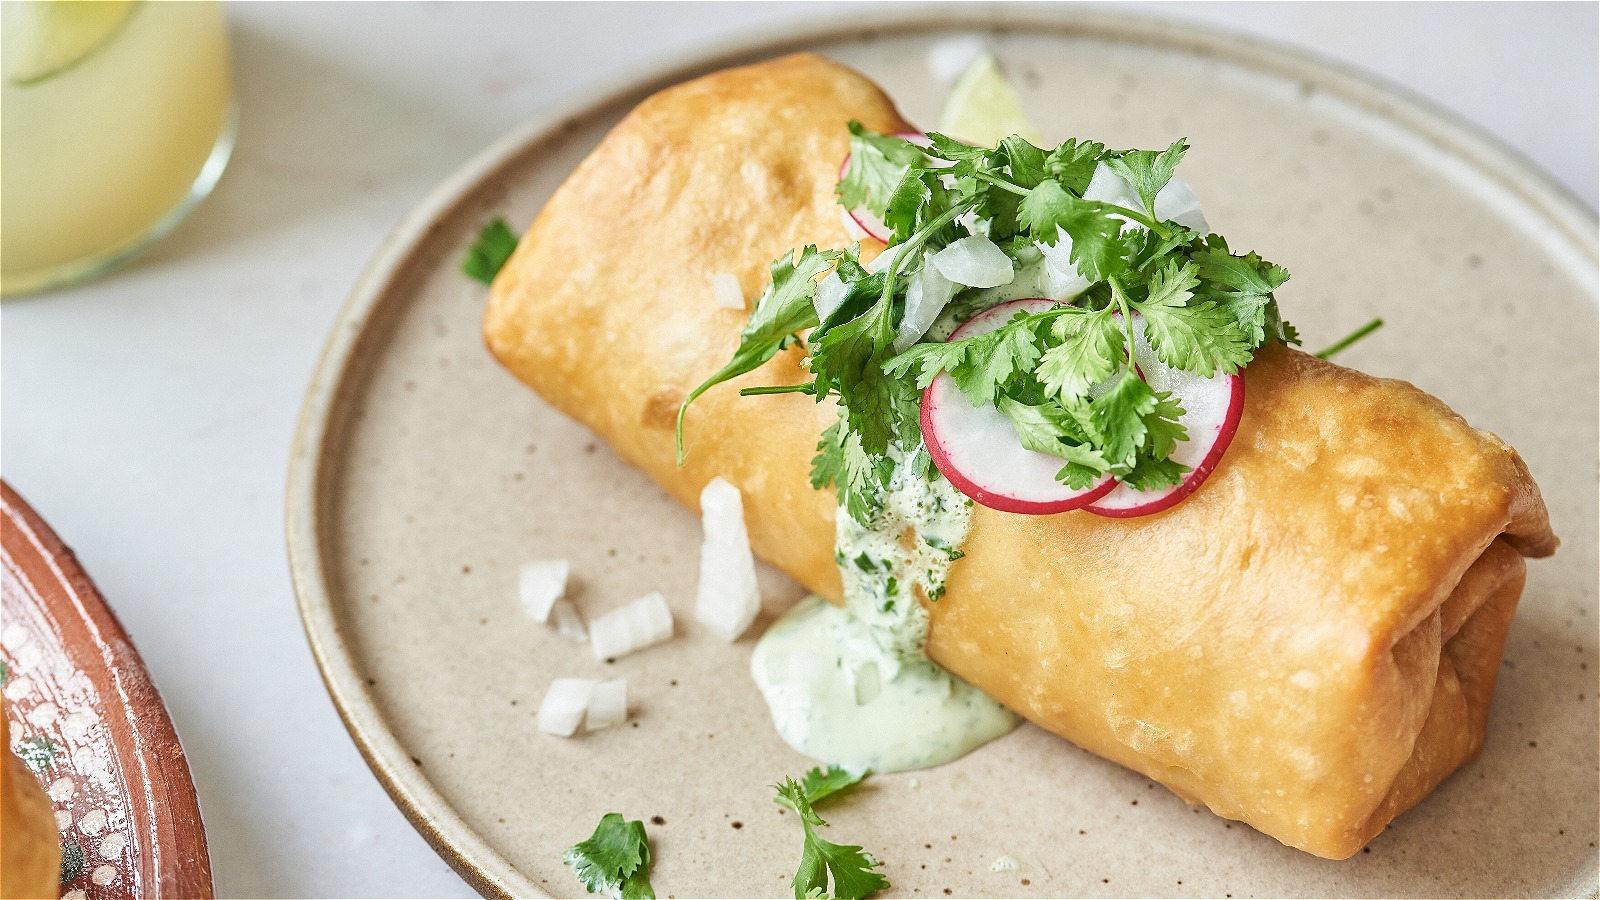 Beef and Cheese Chimichanga - Just Cook Well